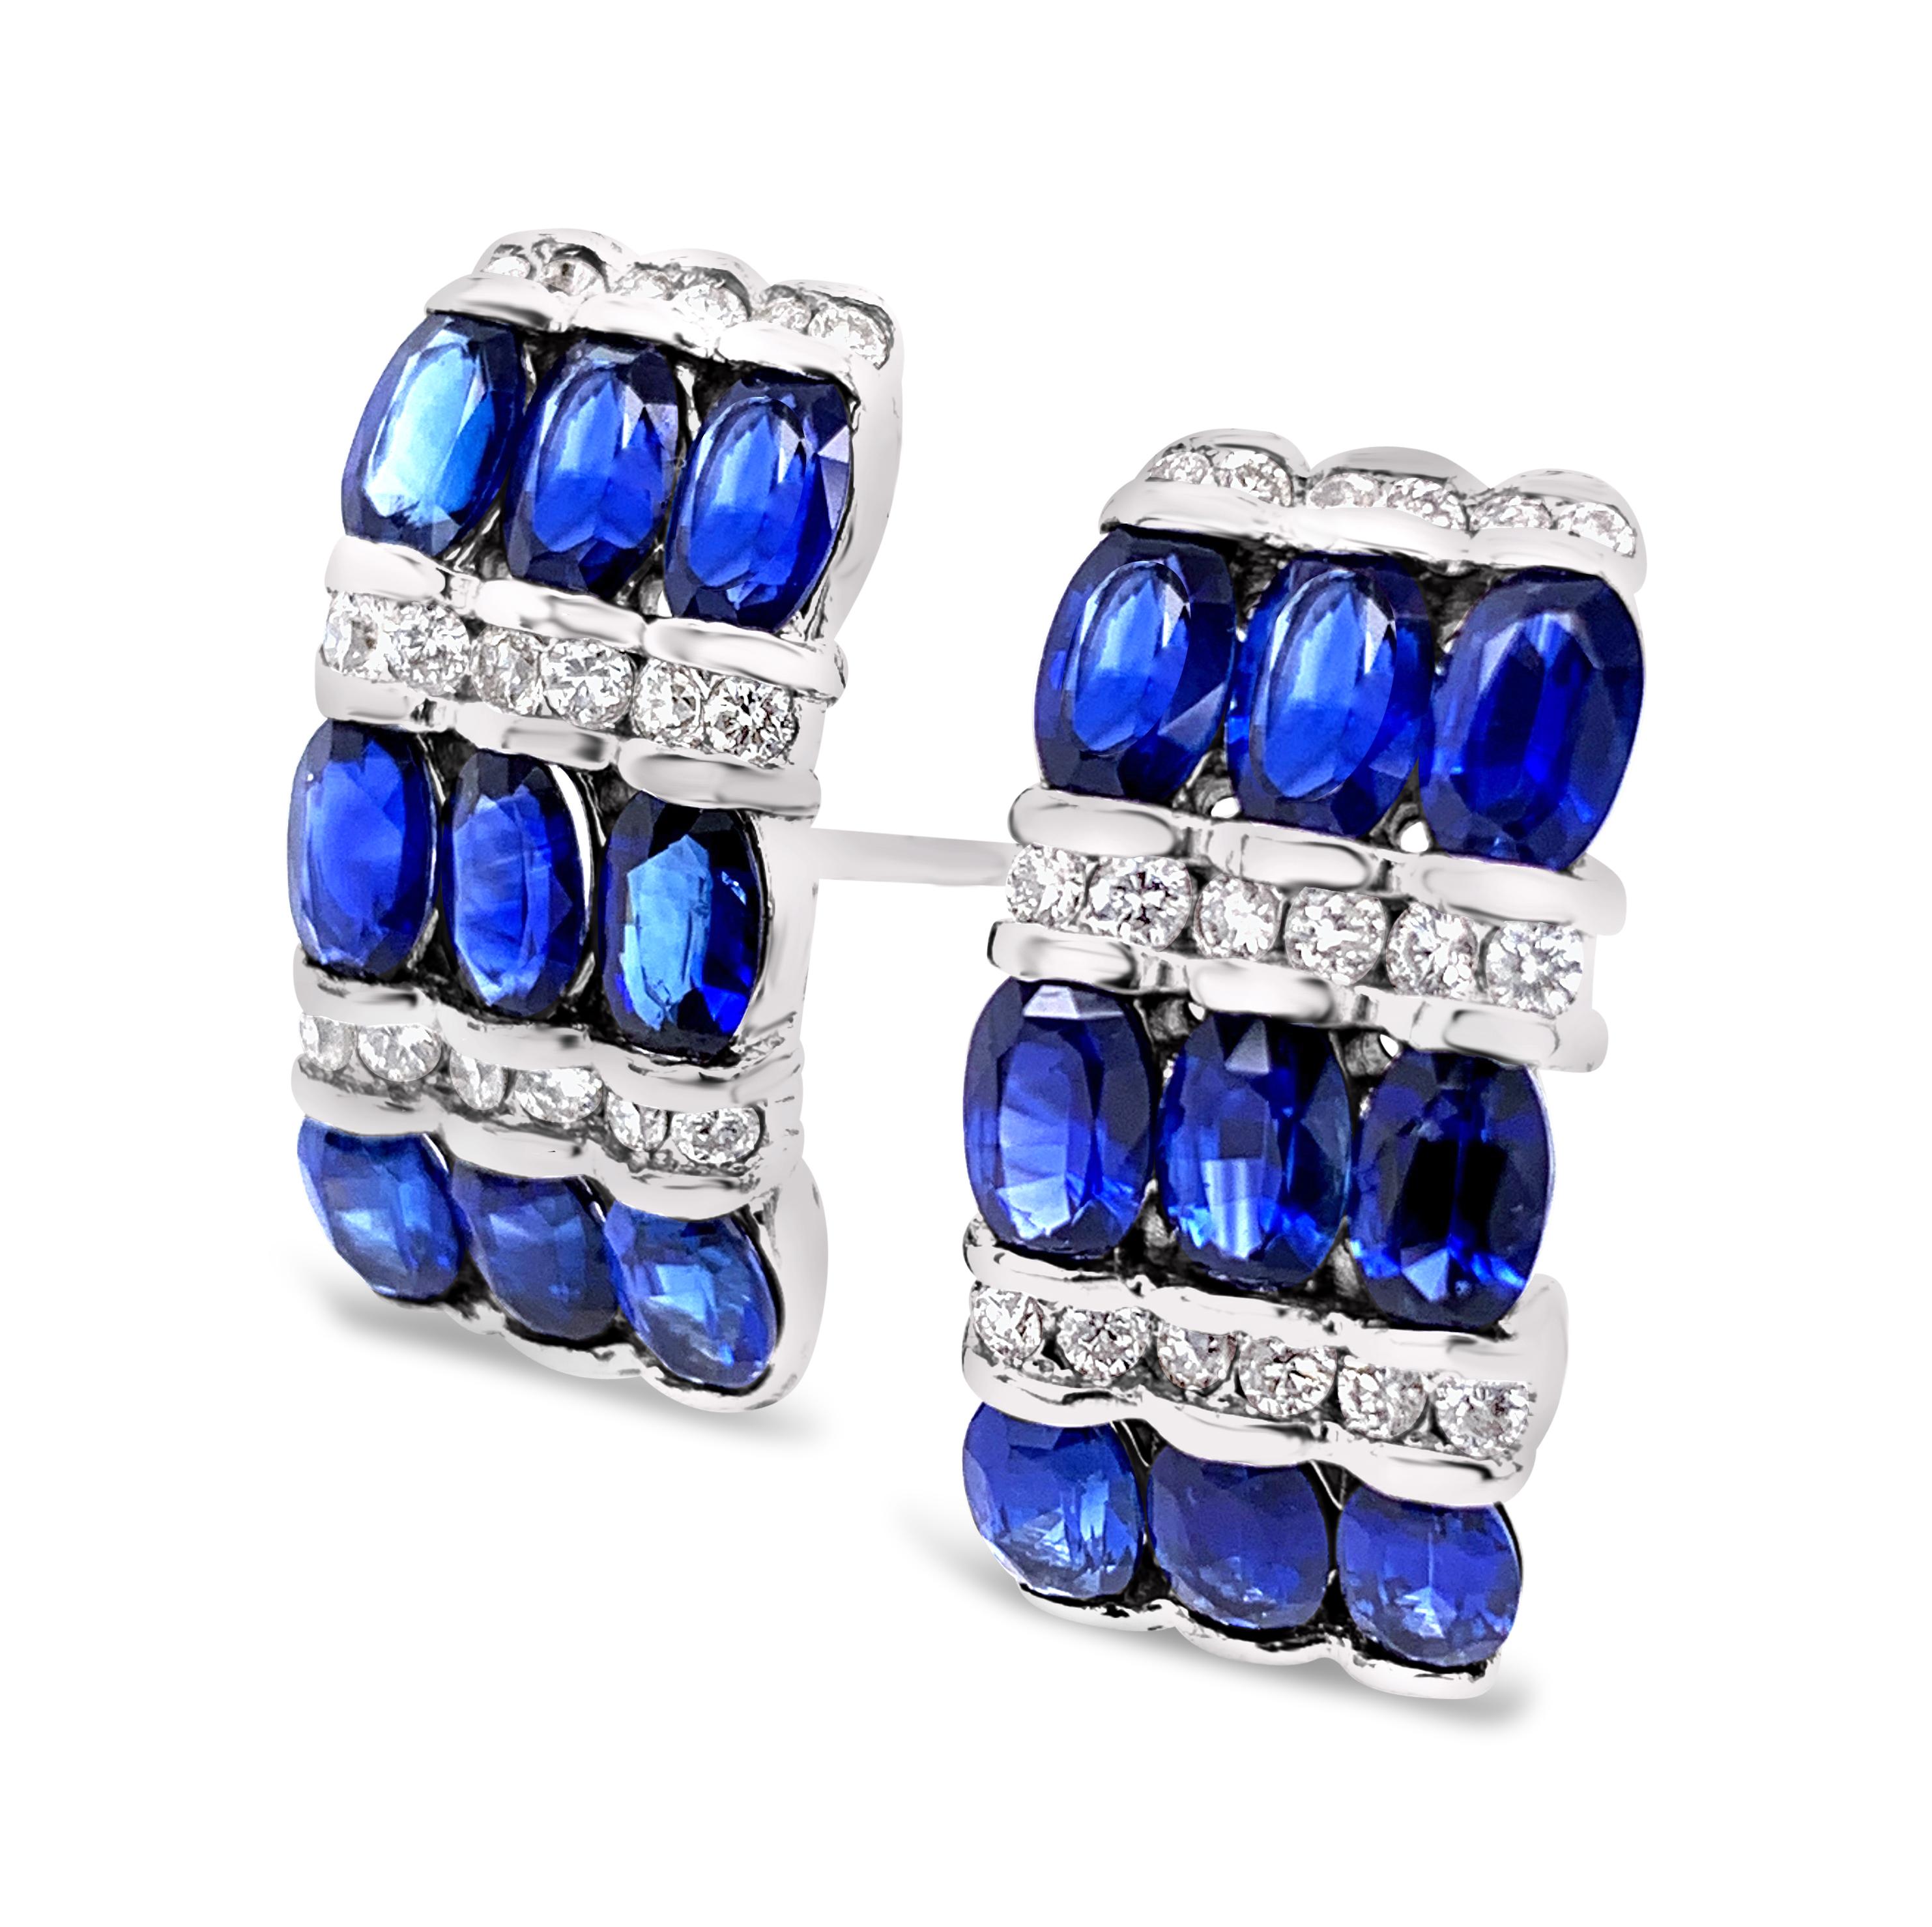 Oval Cut 4.91 Carat 'Total Weight' Oval Sapphire and Diamond Earrings in 18K White Gold For Sale